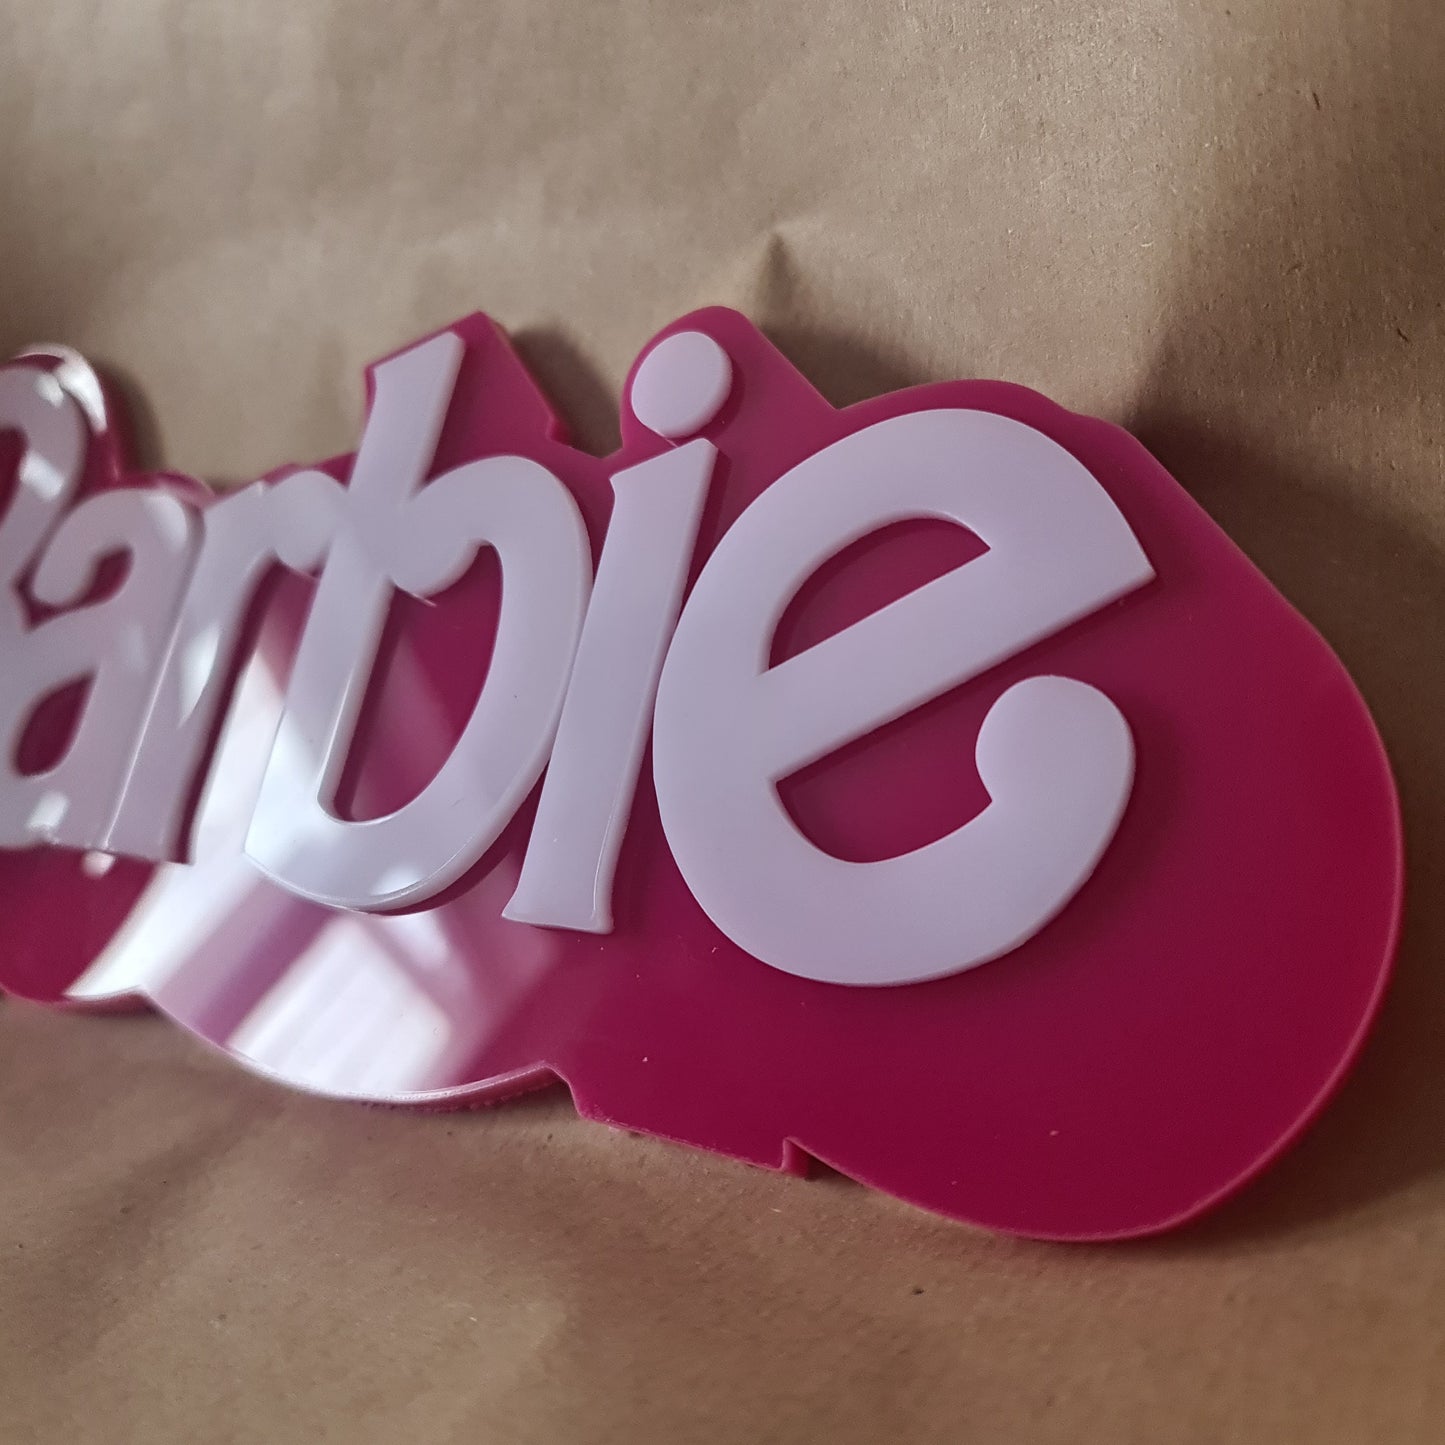 Barbie Acrylic Sign - Retro hand made acrylic sign - Bedroom, Games Room, Office